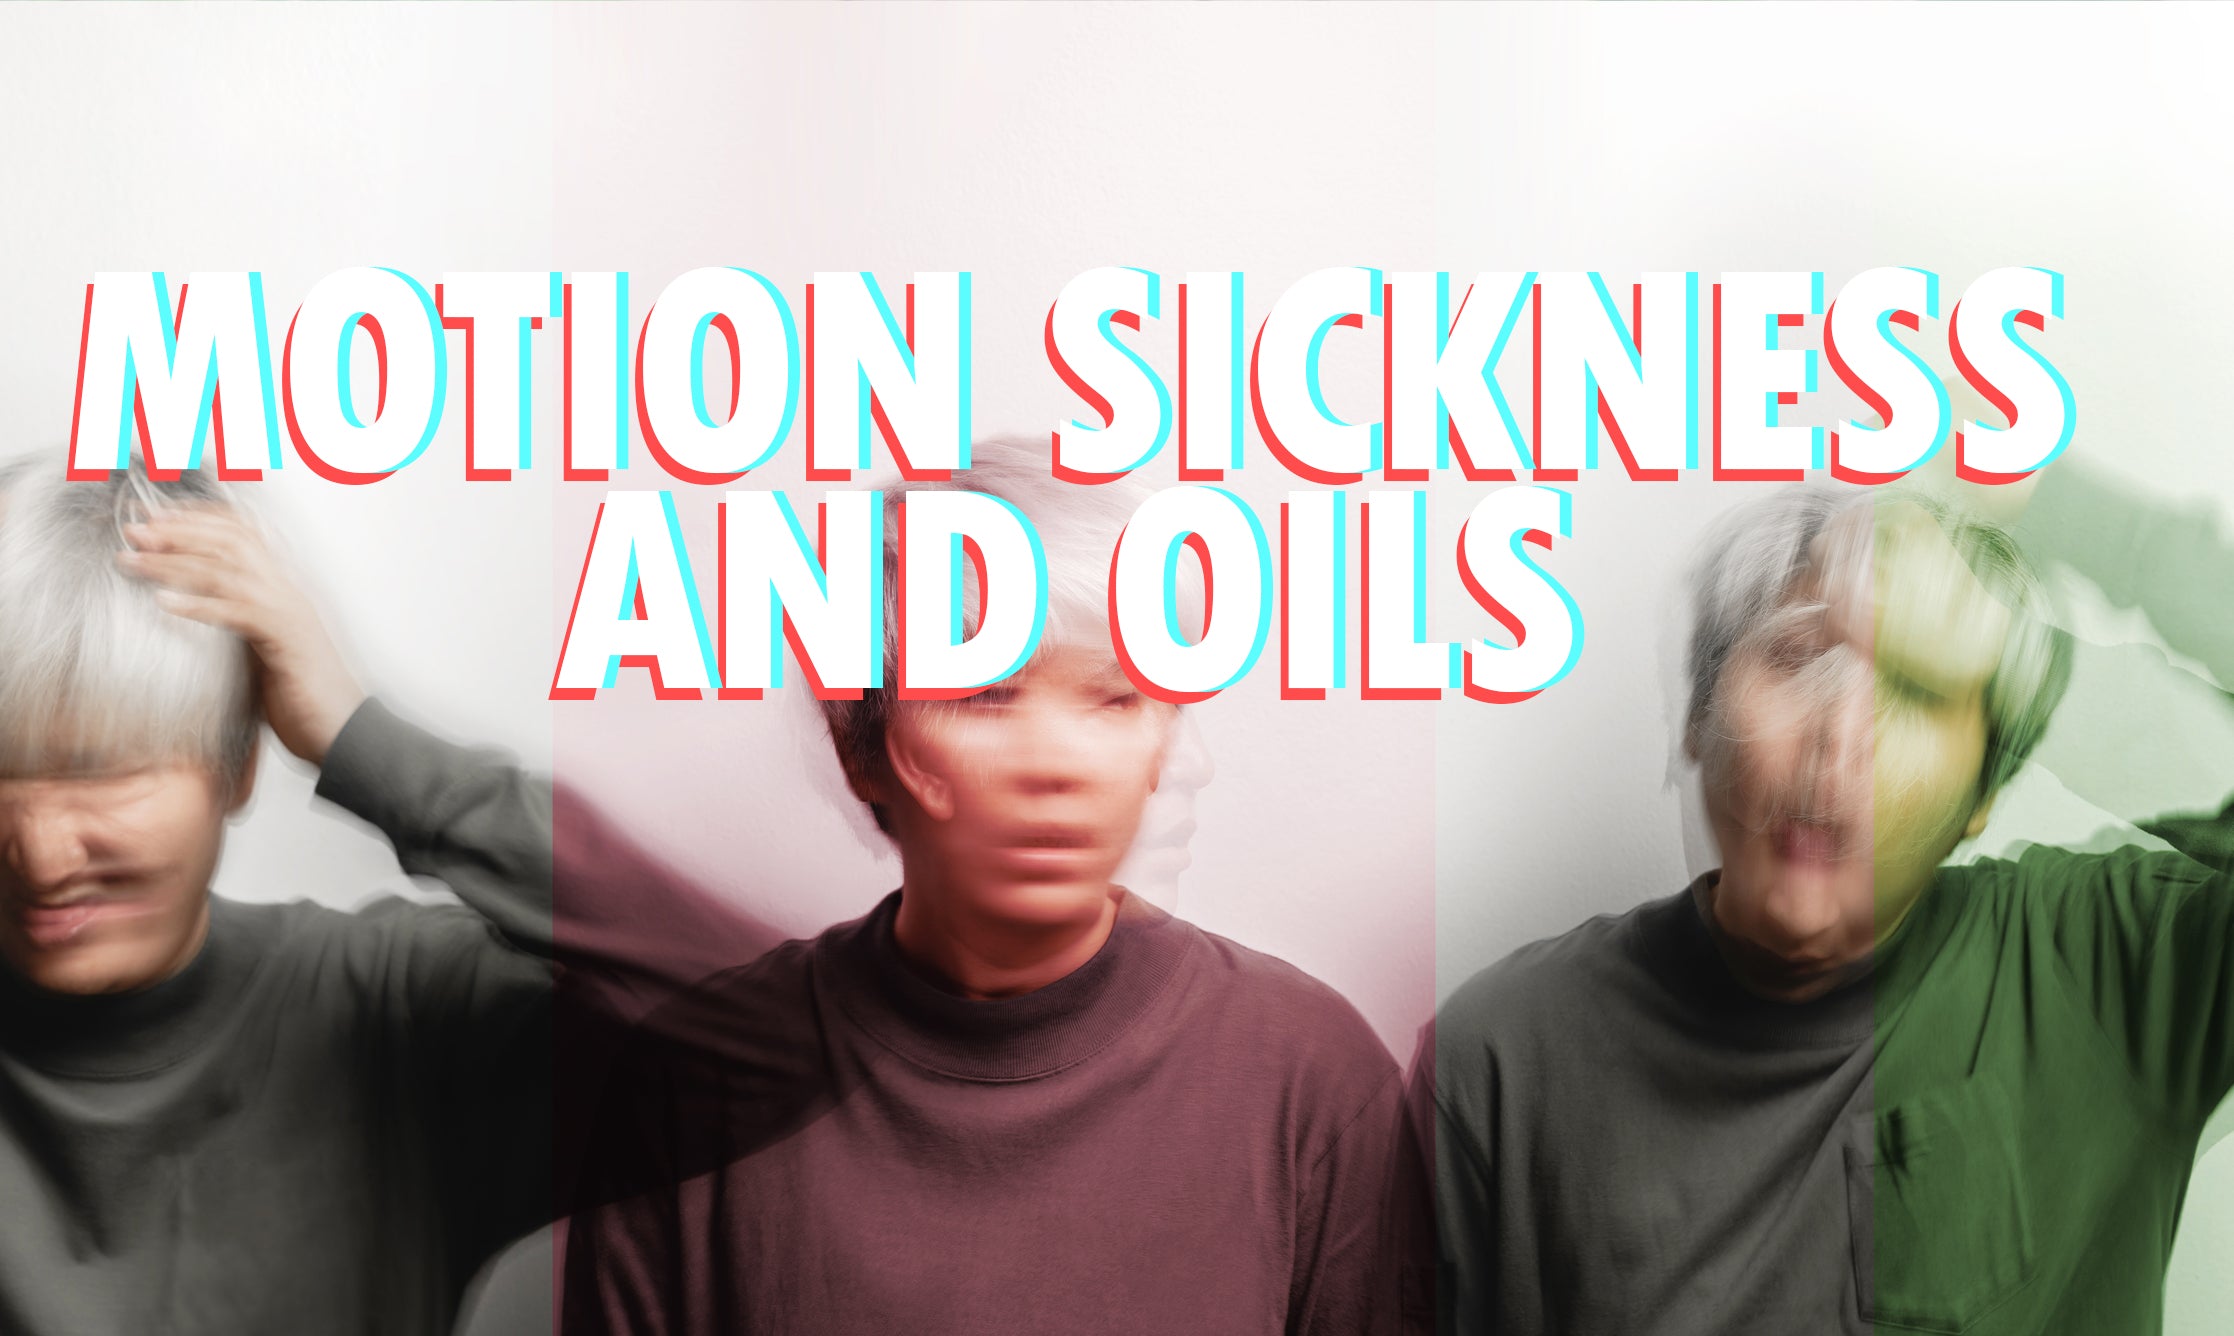 essential oils cure motion sickness and nausea